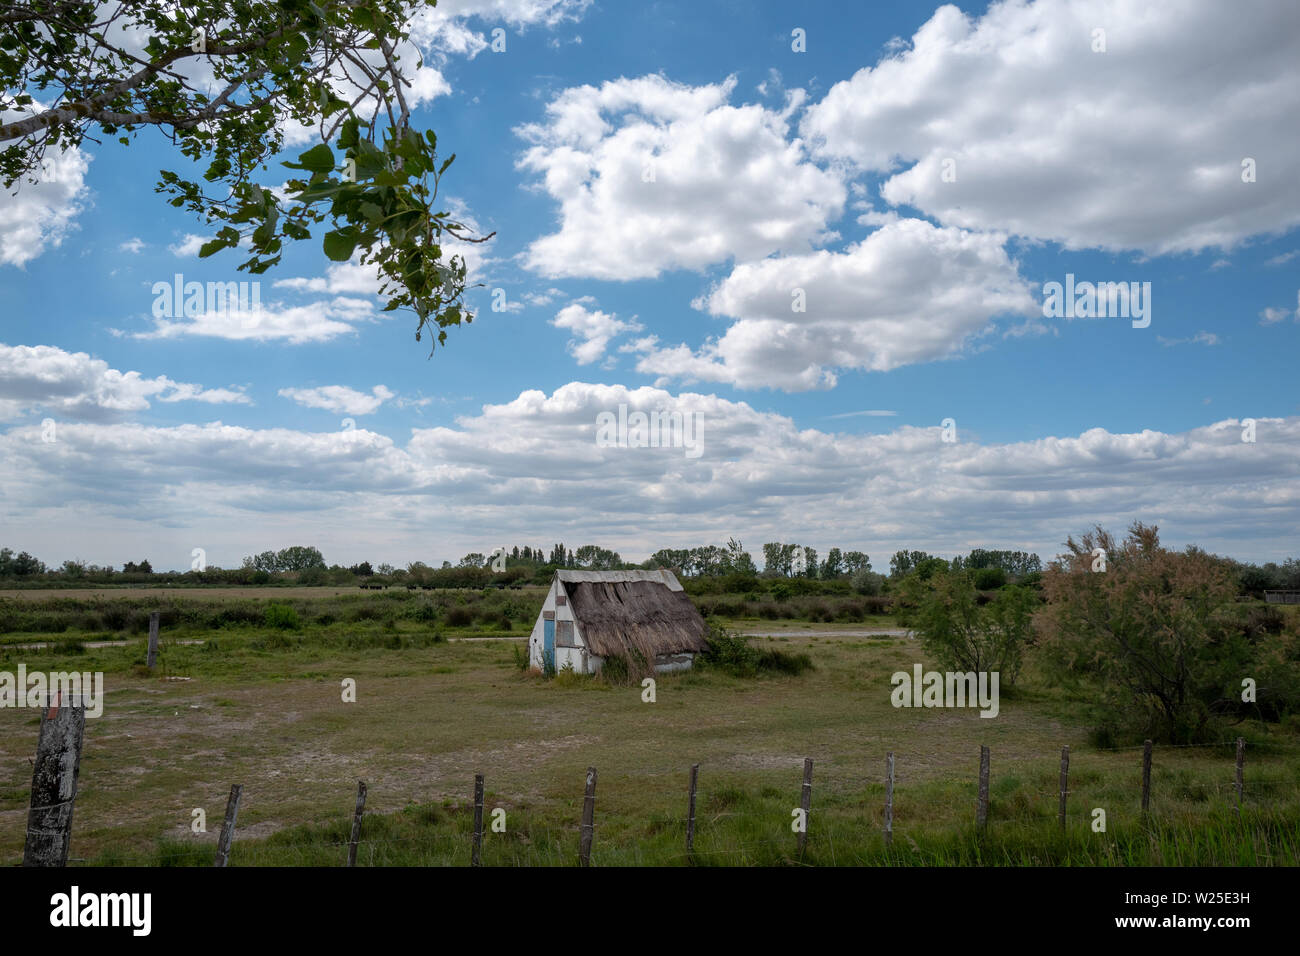 Typical cottage home of Gardian cowboy in Camargue, France, with sky and trees. Stock Photo